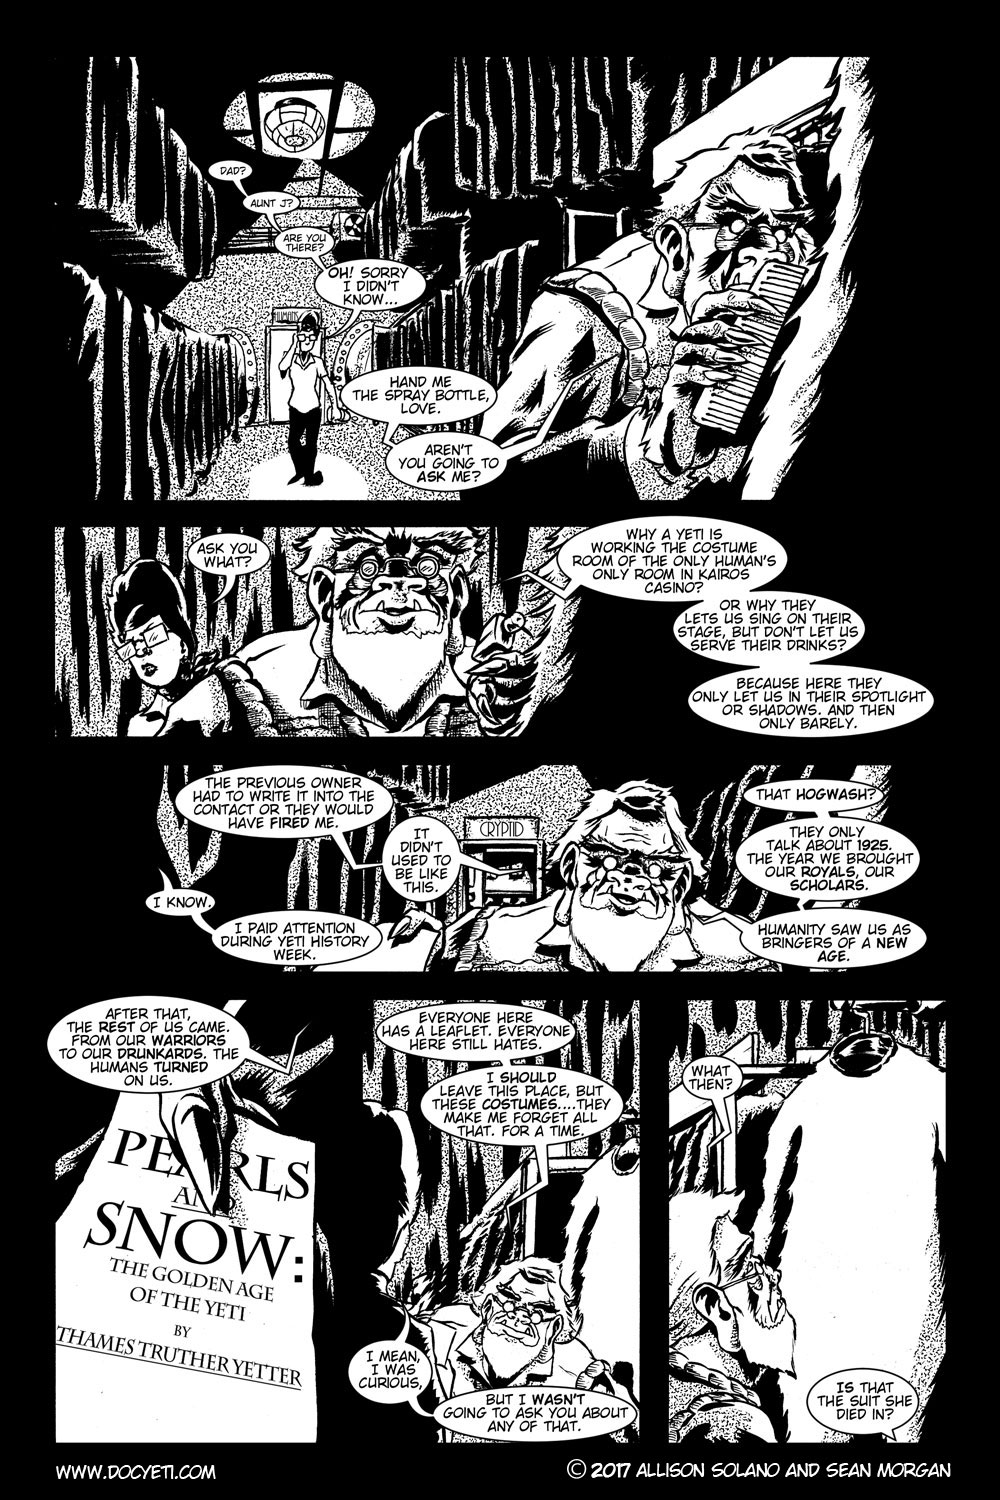 This Yeti for Hire! or the Yeti with the Lace Kerchief! Issue 2 pg.4